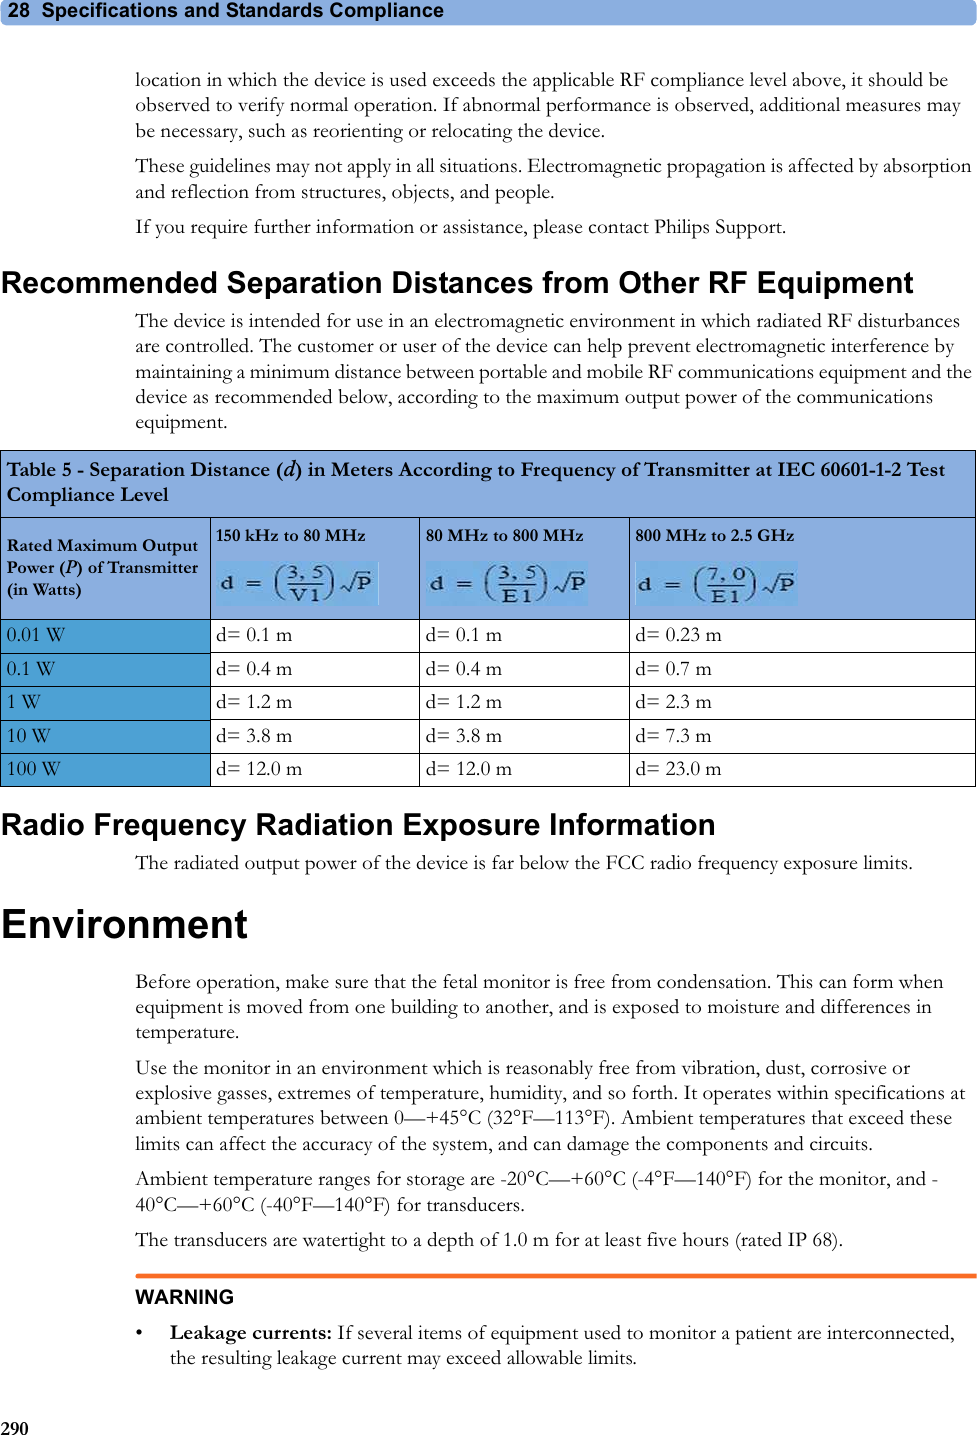 28  Specifications and Standards Compliance290location in which the device is used exceeds the applicable RF compliance level above, it should be observed to verify normal operation. If abnormal performance is observed, additional measures may be necessary, such as reorienting or relocating the device.These guidelines may not apply in all situations. Electromagnetic propagation is affected by absorption and reflection from structures, objects, and people.If you require further information or assistance, please contact Philips Support.Recommended Separation Distances from Other RF EquipmentThe device is intended for use in an electromagnetic environment in which radiated RF disturbances are controlled. The customer or user of the device can help prevent electromagnetic interference by maintaining a minimum distance between portable and mobile RF communications equipment and the device as recommended below, according to the maximum output power of the communications equipment.Radio Frequency Radiation Exposure InformationThe radiated output power of the device is far below the FCC radio frequency exposure limits.EnvironmentBefore operation, make sure that the fetal monitor is free from condensation. This can form when equipment is moved from one building to another, and is exposed to moisture and differences in temperature.Use the monitor in an environment which is reasonably free from vibration, dust, corrosive or explosive gasses, extremes of temperature, humidity, and so forth. It operates within specifications at ambient temperatures between 0—+45°C (32°F—113°F). Ambient temperatures that exceed these limits can affect the accuracy of the system, and can damage the components and circuits.Ambient temperature ranges for storage are -20°C—+60°C (-4°F—140°F) for the monitor, and -40°C—+60°C (-40°F—140°F) for transducers.The transducers are watertight to a depth of 1.0 m for at least five hours (rated IP 68).WARNING•Leakage currents: If several items of equipment used to monitor a patient are interconnected, the resulting leakage current may exceed allowable limits.Table 5 - Separation Distance (d) in Meters According to Frequency of Transmitter at IEC 60601-1-2 Test Compliance LevelRated Maximum Output Power (P) of Transmitter (in Watts)150 kHz to 80 MHz 80 MHz to 800 MHz 800 MHz to 2.5 GHz0.01 W d= 0.1 m d= 0.1 m d= 0.23 m0.1 W d= 0.4 m d= 0.4 m d= 0.7 m1 W d= 1.2 m d= 1.2 m d= 2.3 m10 W d= 3.8 m d= 3.8 m d= 7.3 m100 W d= 12.0 m d= 12.0 m d= 23.0 m